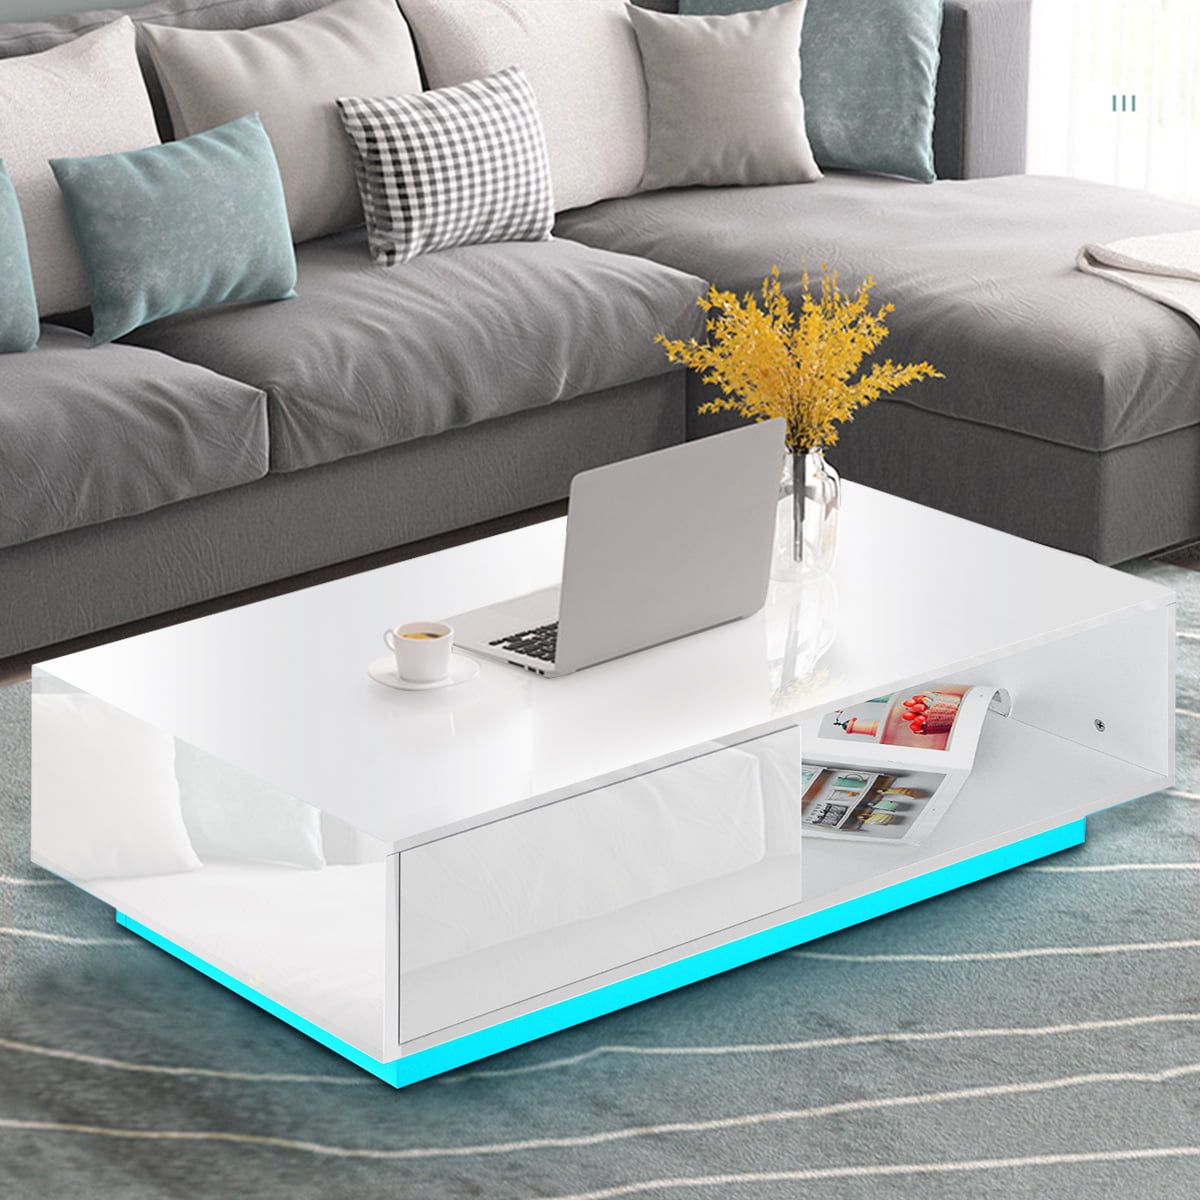 High Gloss Rgb Led Coffee Table With 2 Drawer Storage Modern Sofa Side In Coffee Tables With Drawers And Led Lights (View 3 of 15)